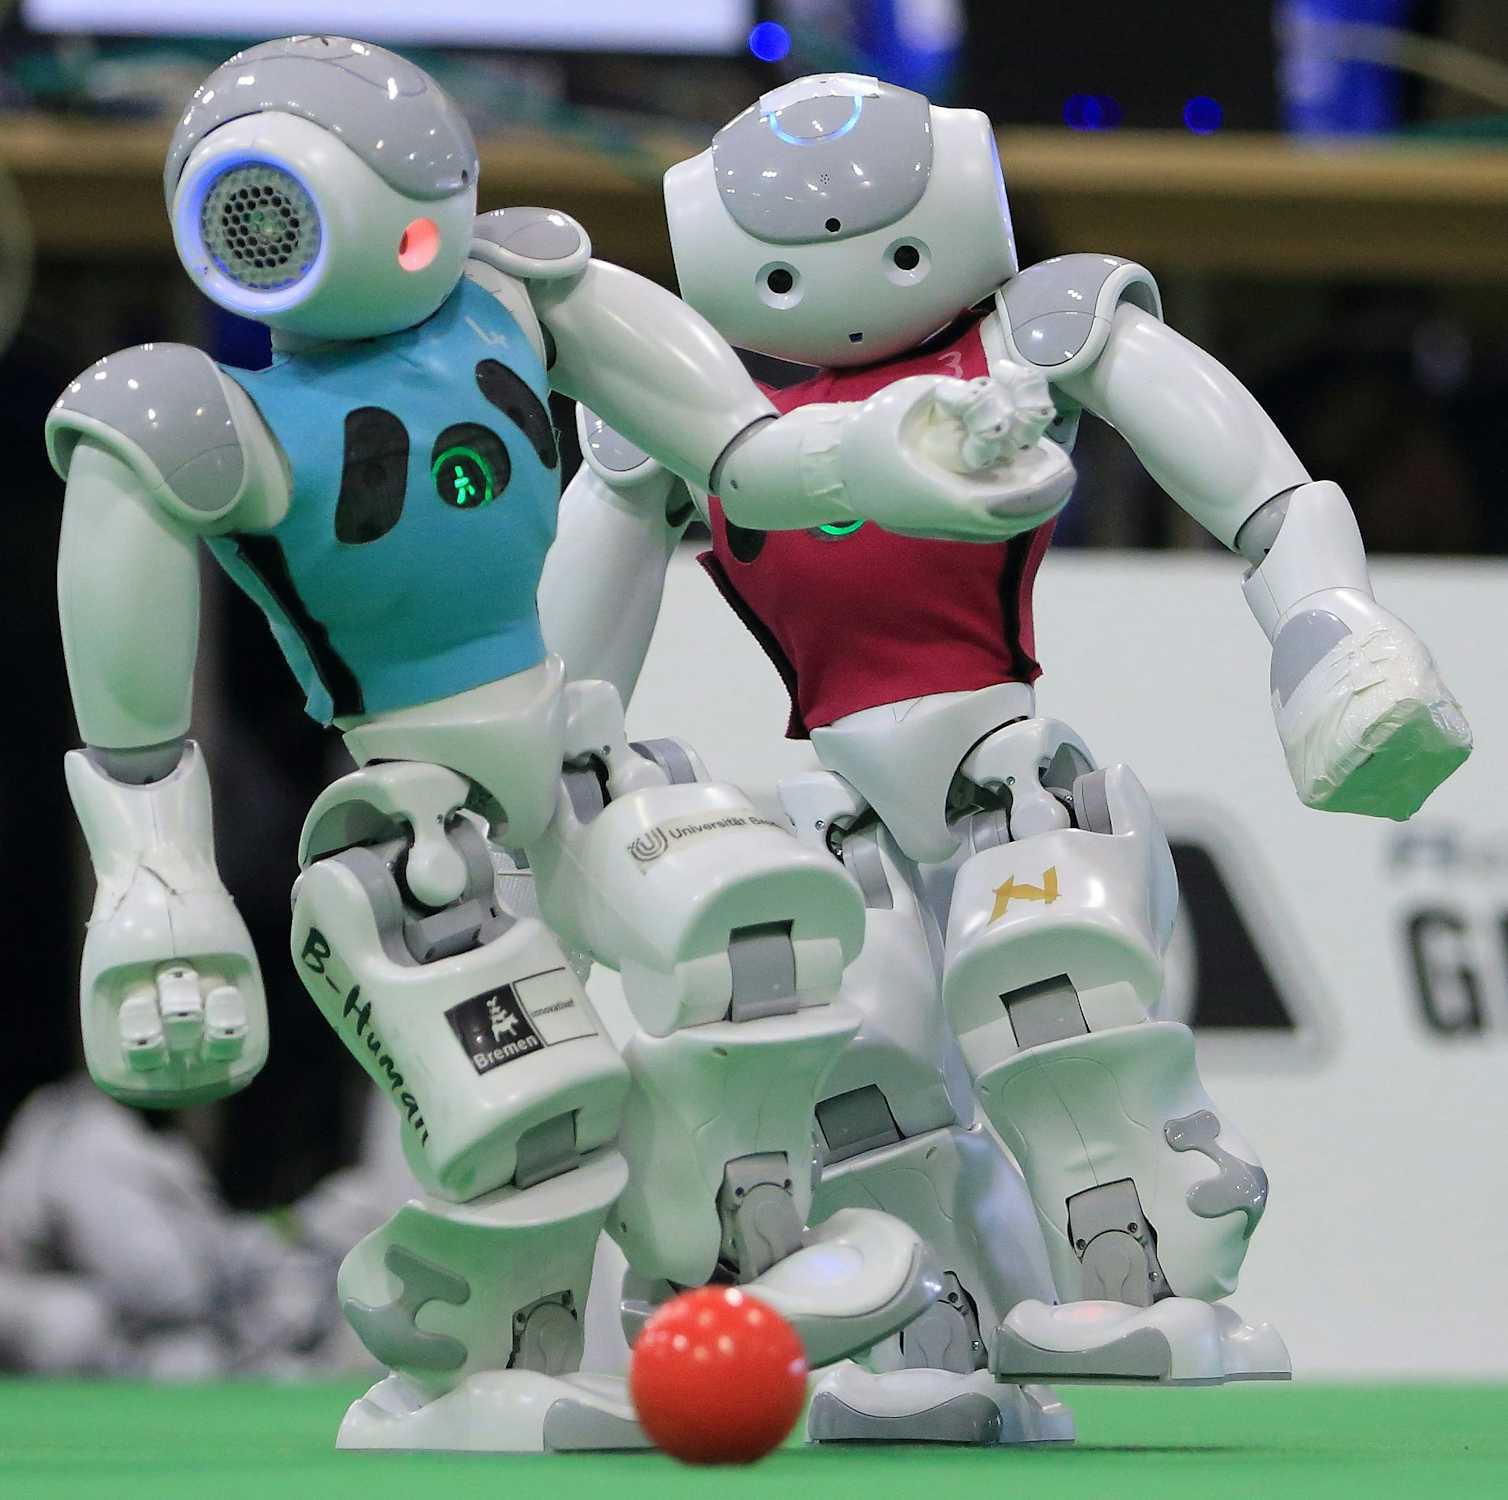 Footballing androids of RoboCup are vital players in our robotic future